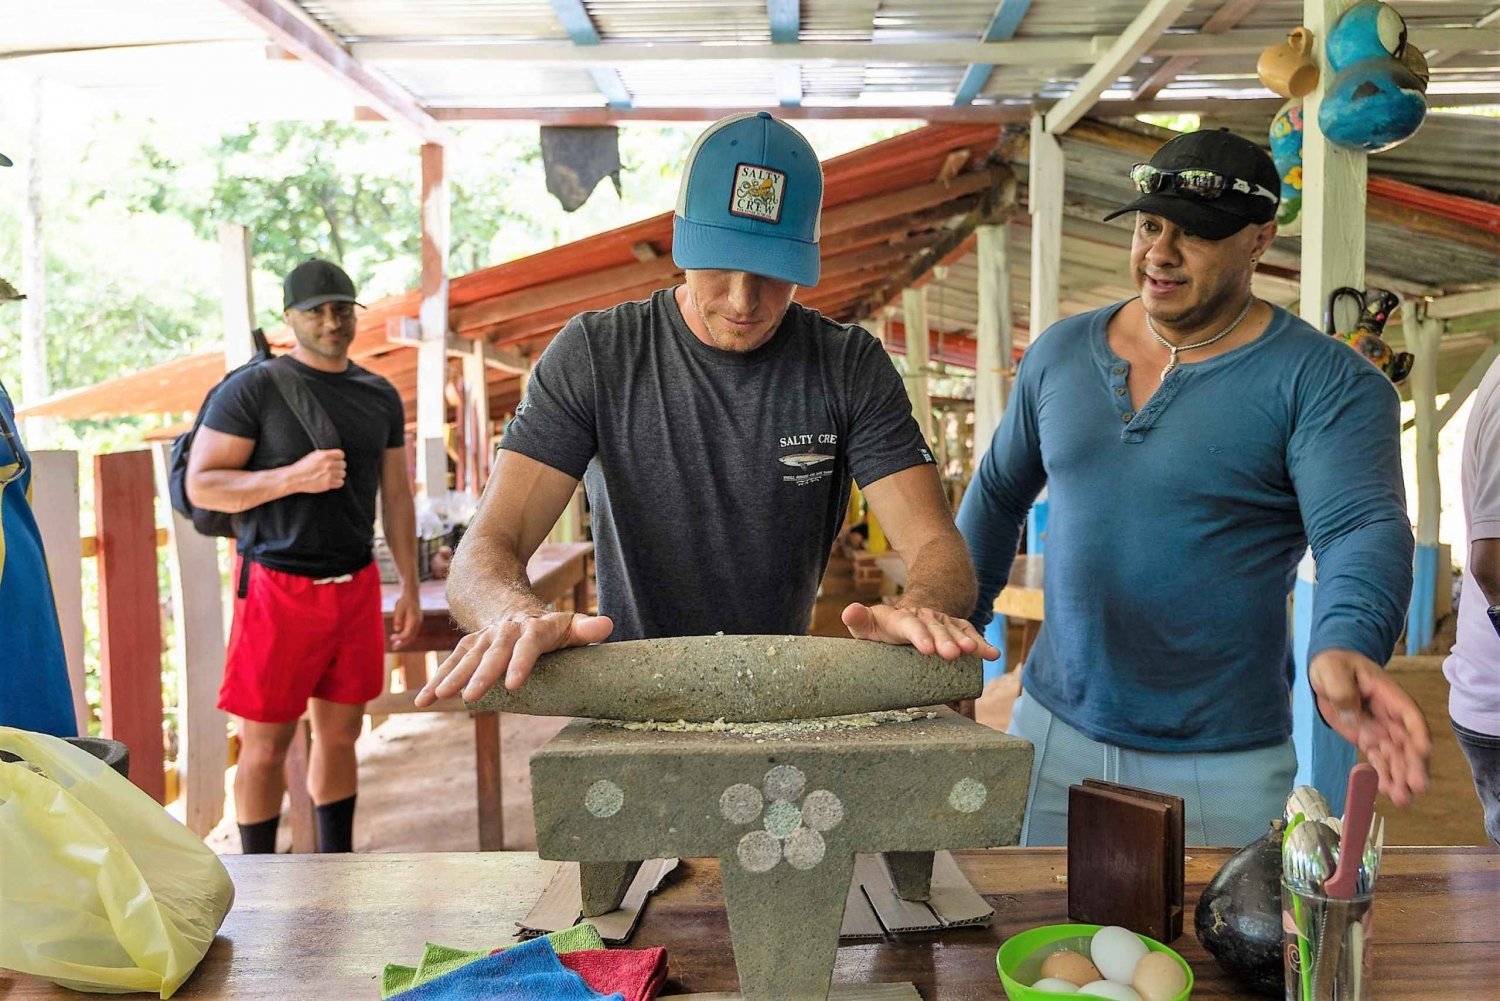 Huatulco: Coffee Flavor Waterfall Tour with Local Lunch